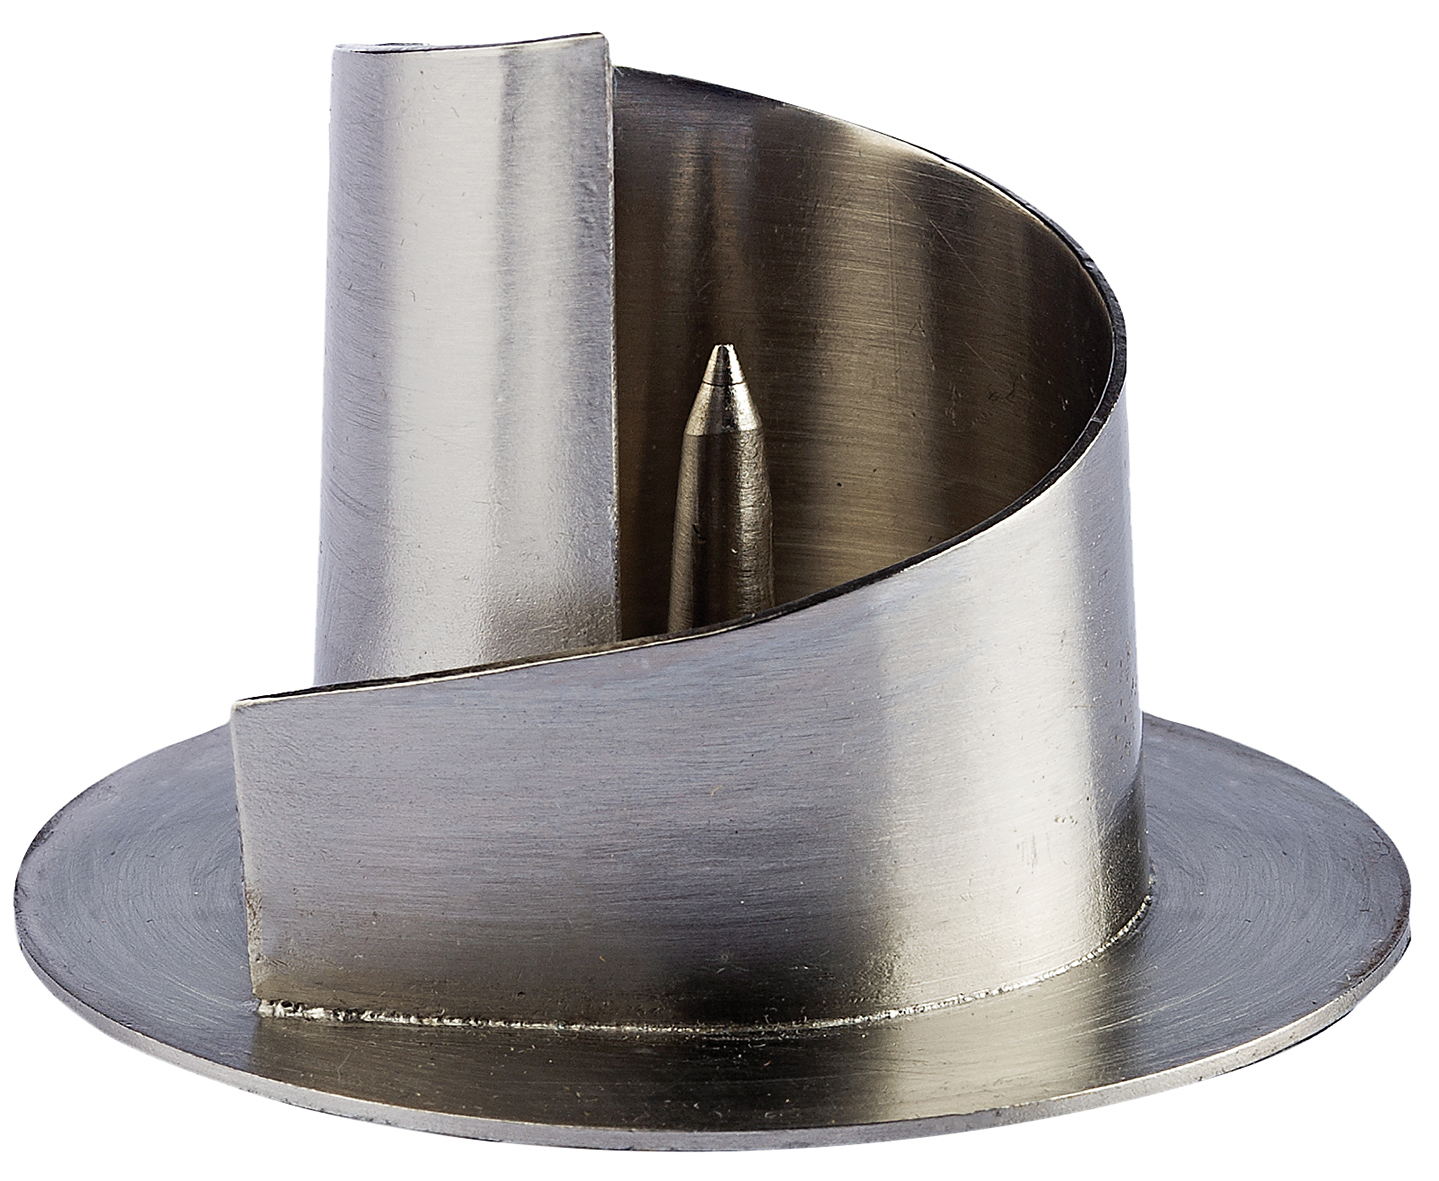 Candle Holder Dynamic Curve made of Nickel-Plated Brass